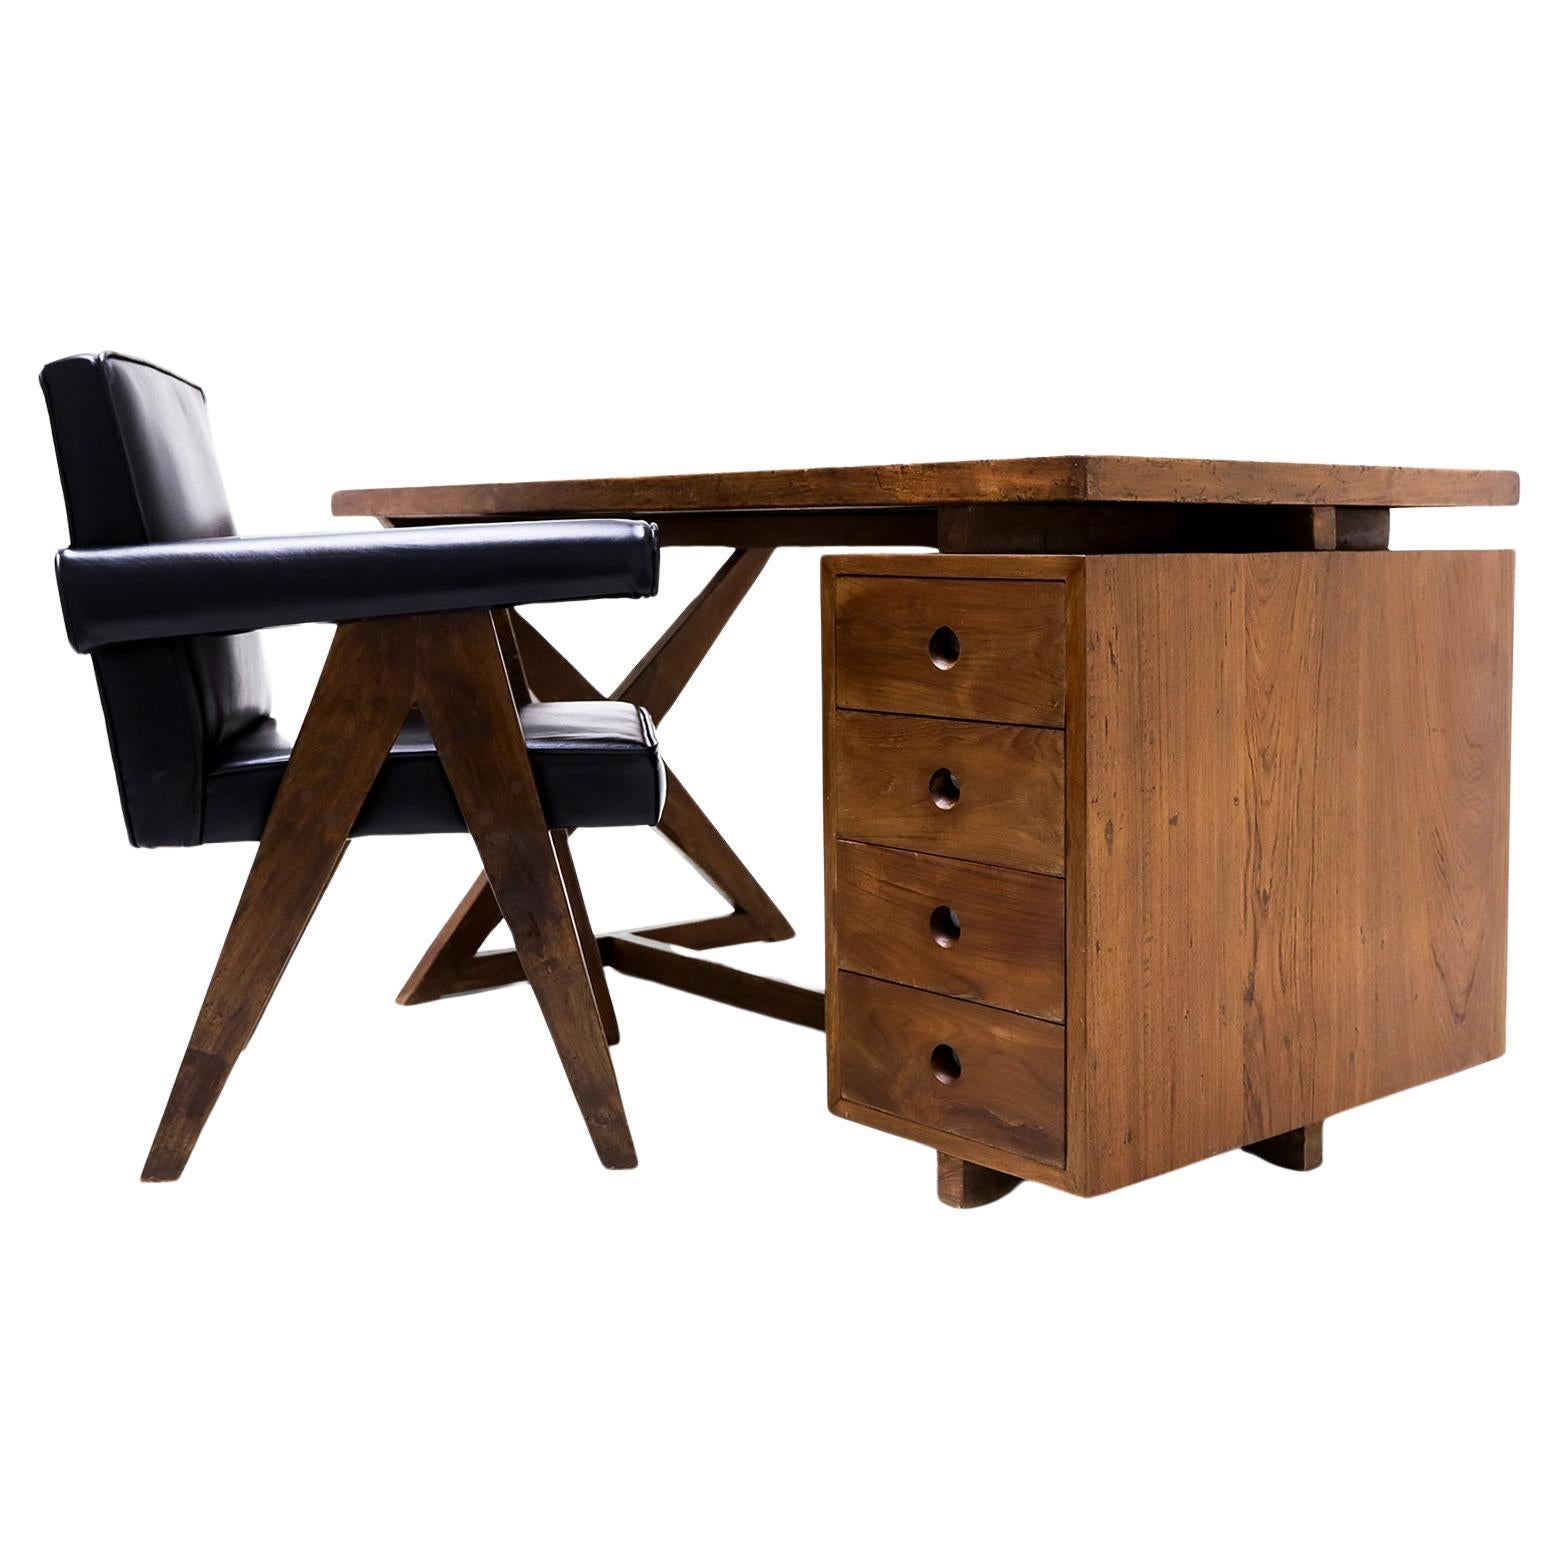 Pierre Jeanneret  X desk with a Model Pj Si 30A Committee Chair, Chandigarh, 60s For Sale